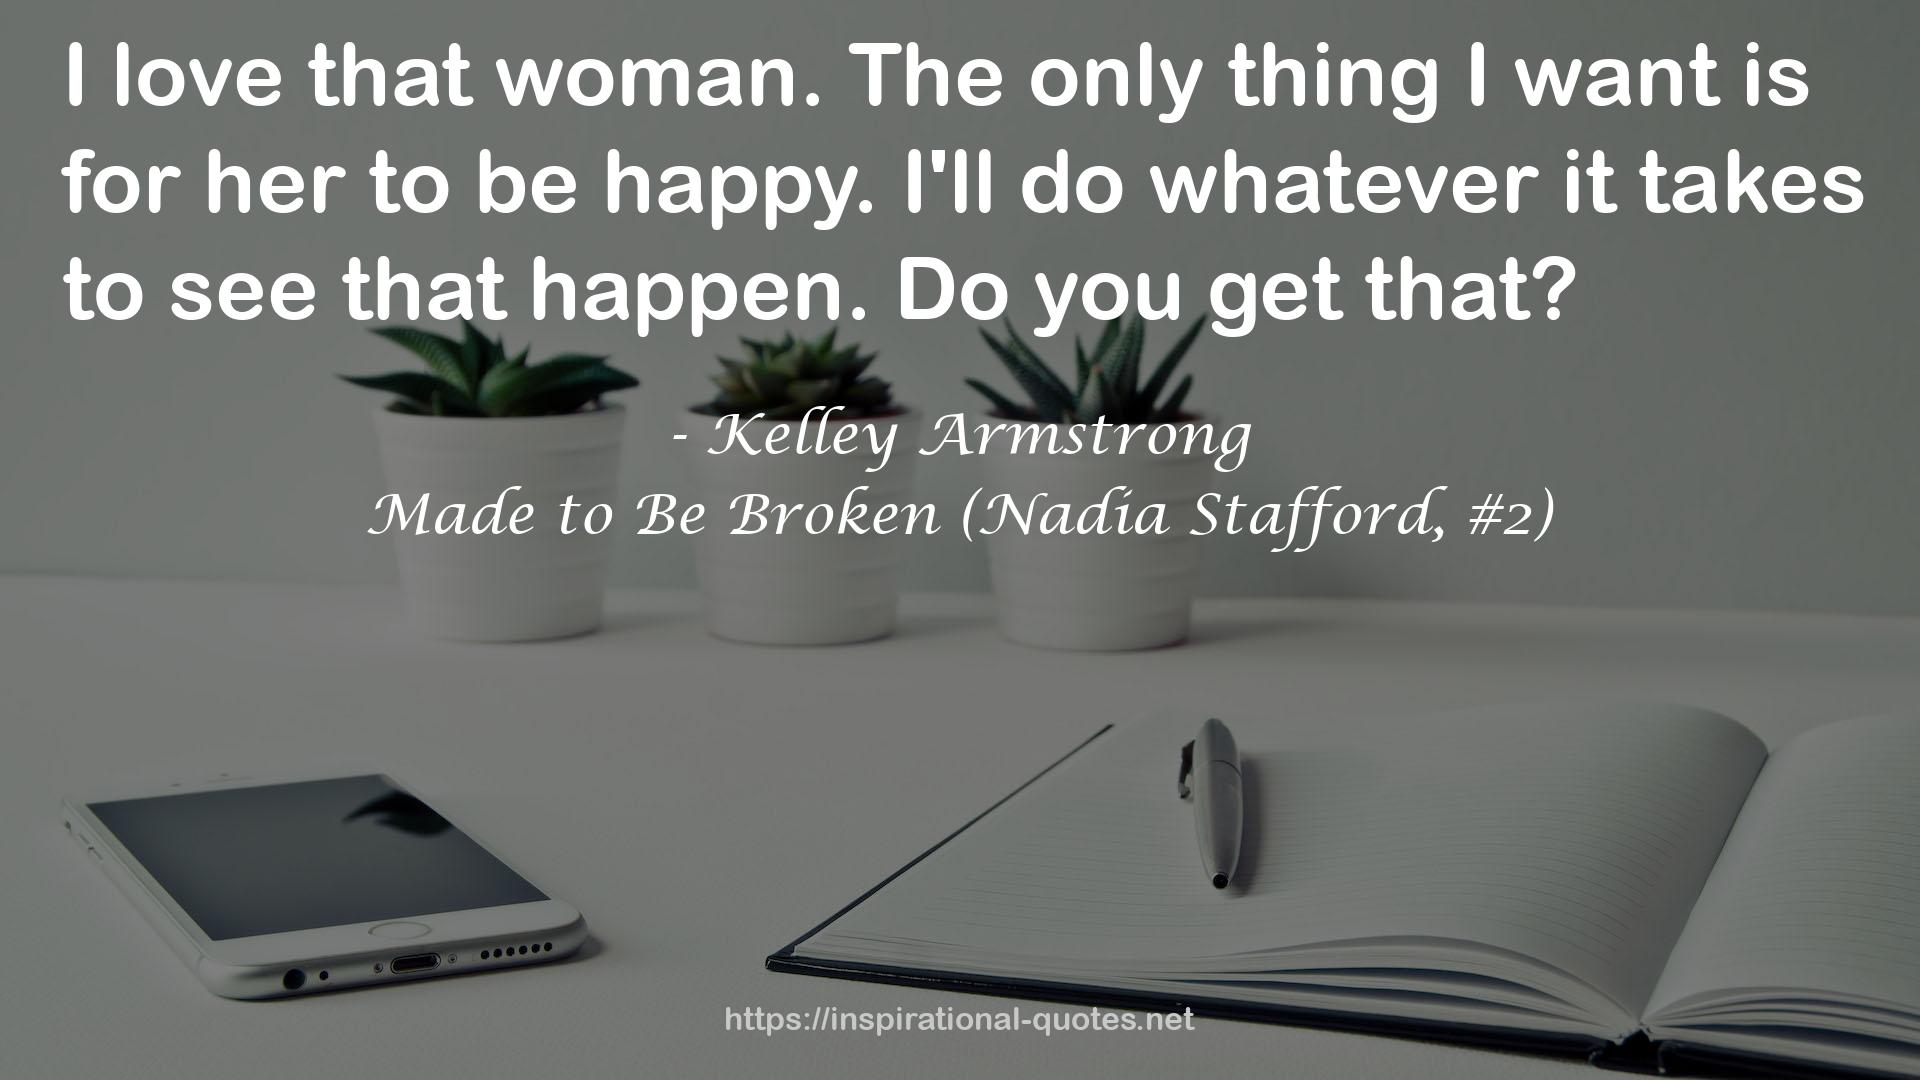 Made to Be Broken (Nadia Stafford, #2) QUOTES